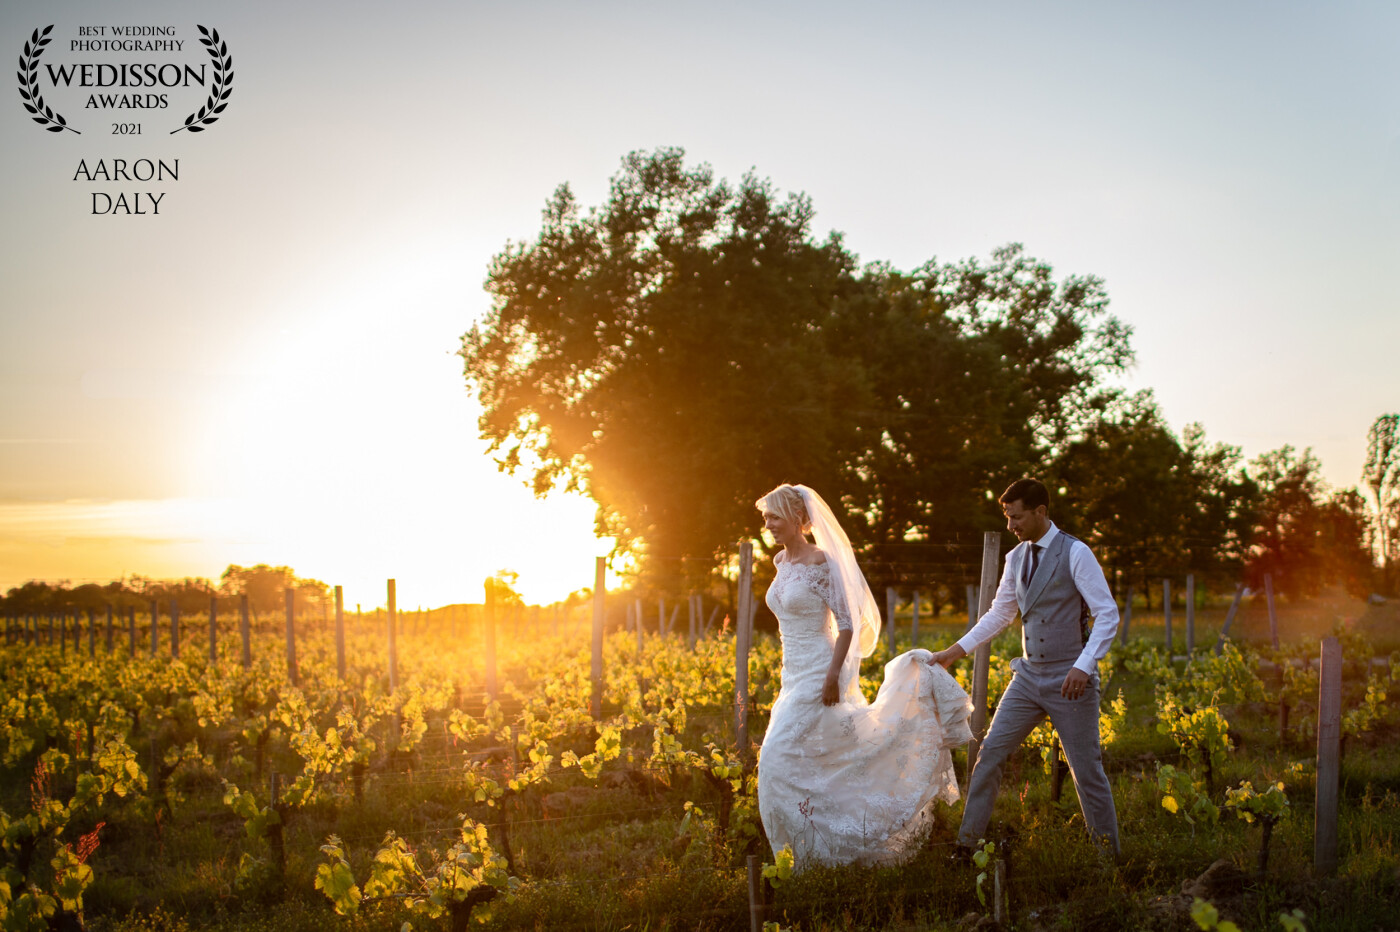 Haley & Rob making their way through the vines for the sunset of their french wedding day. An amazing wedding vineyard venue & celebrations to match!